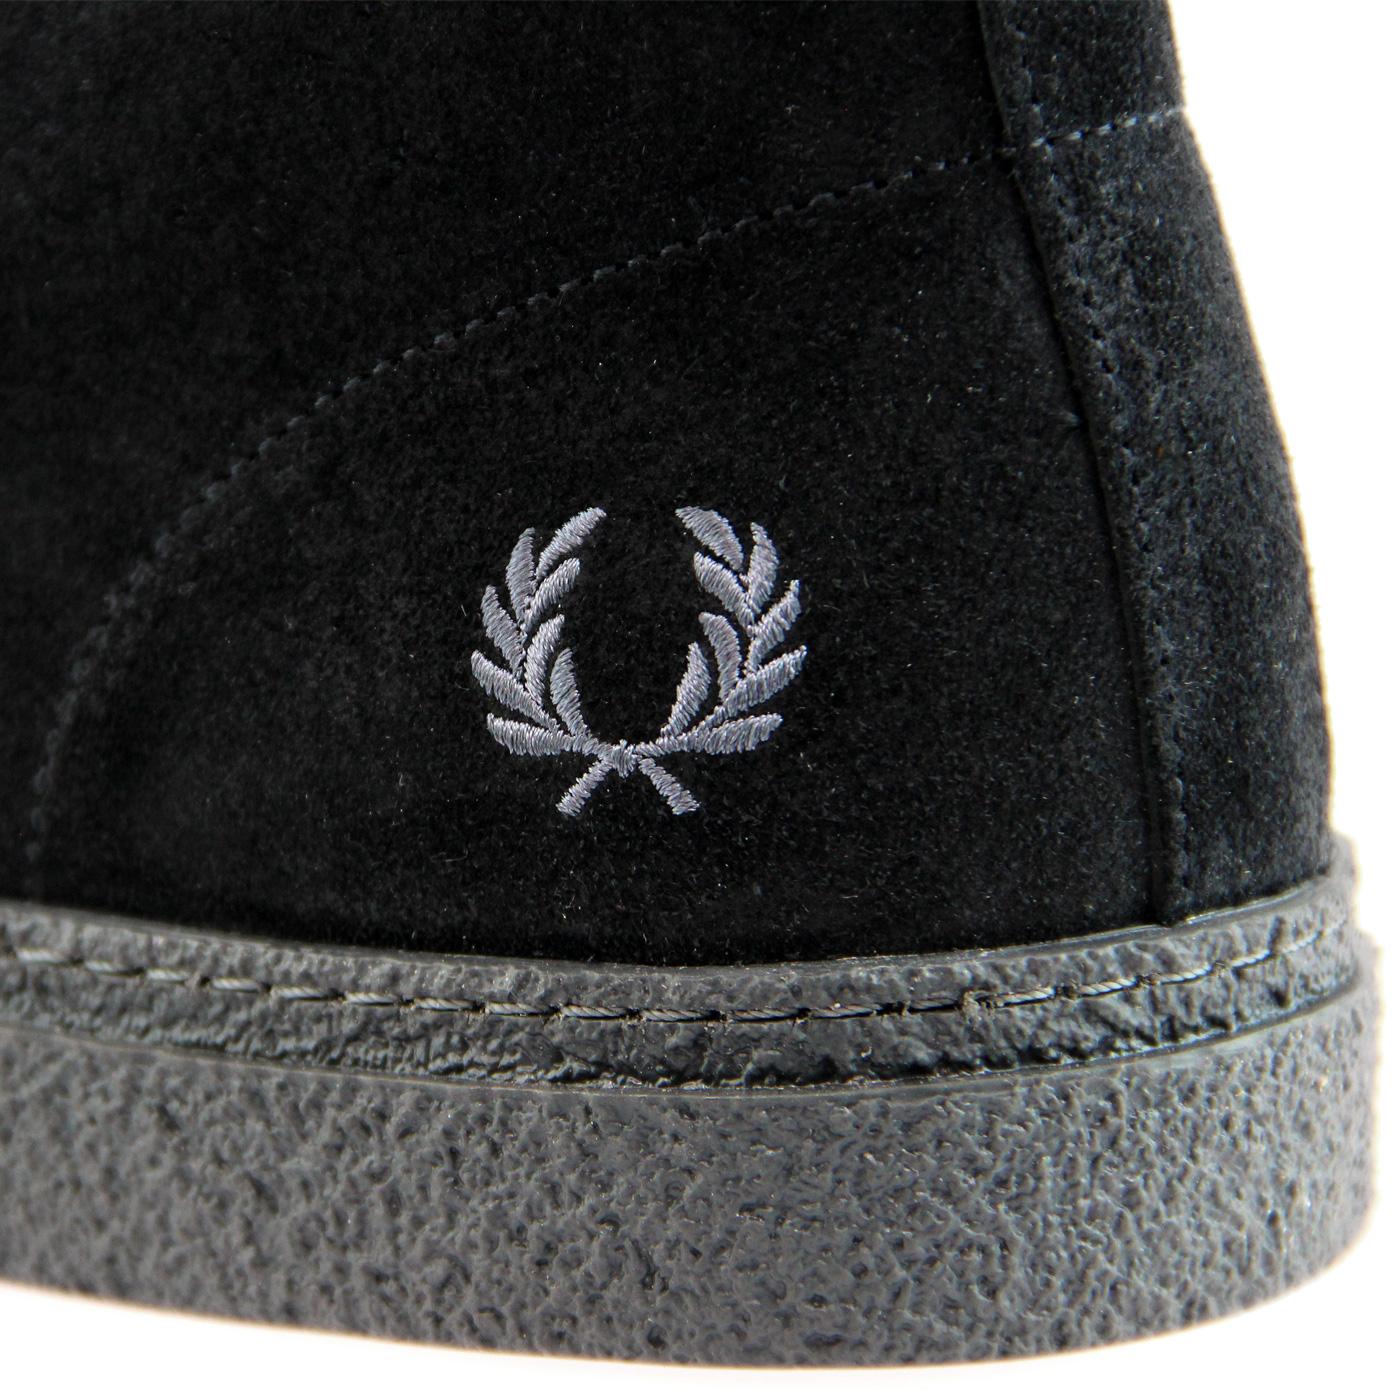 FRED PERRY 'Hawley' Retro Mod Desert Boots in Black